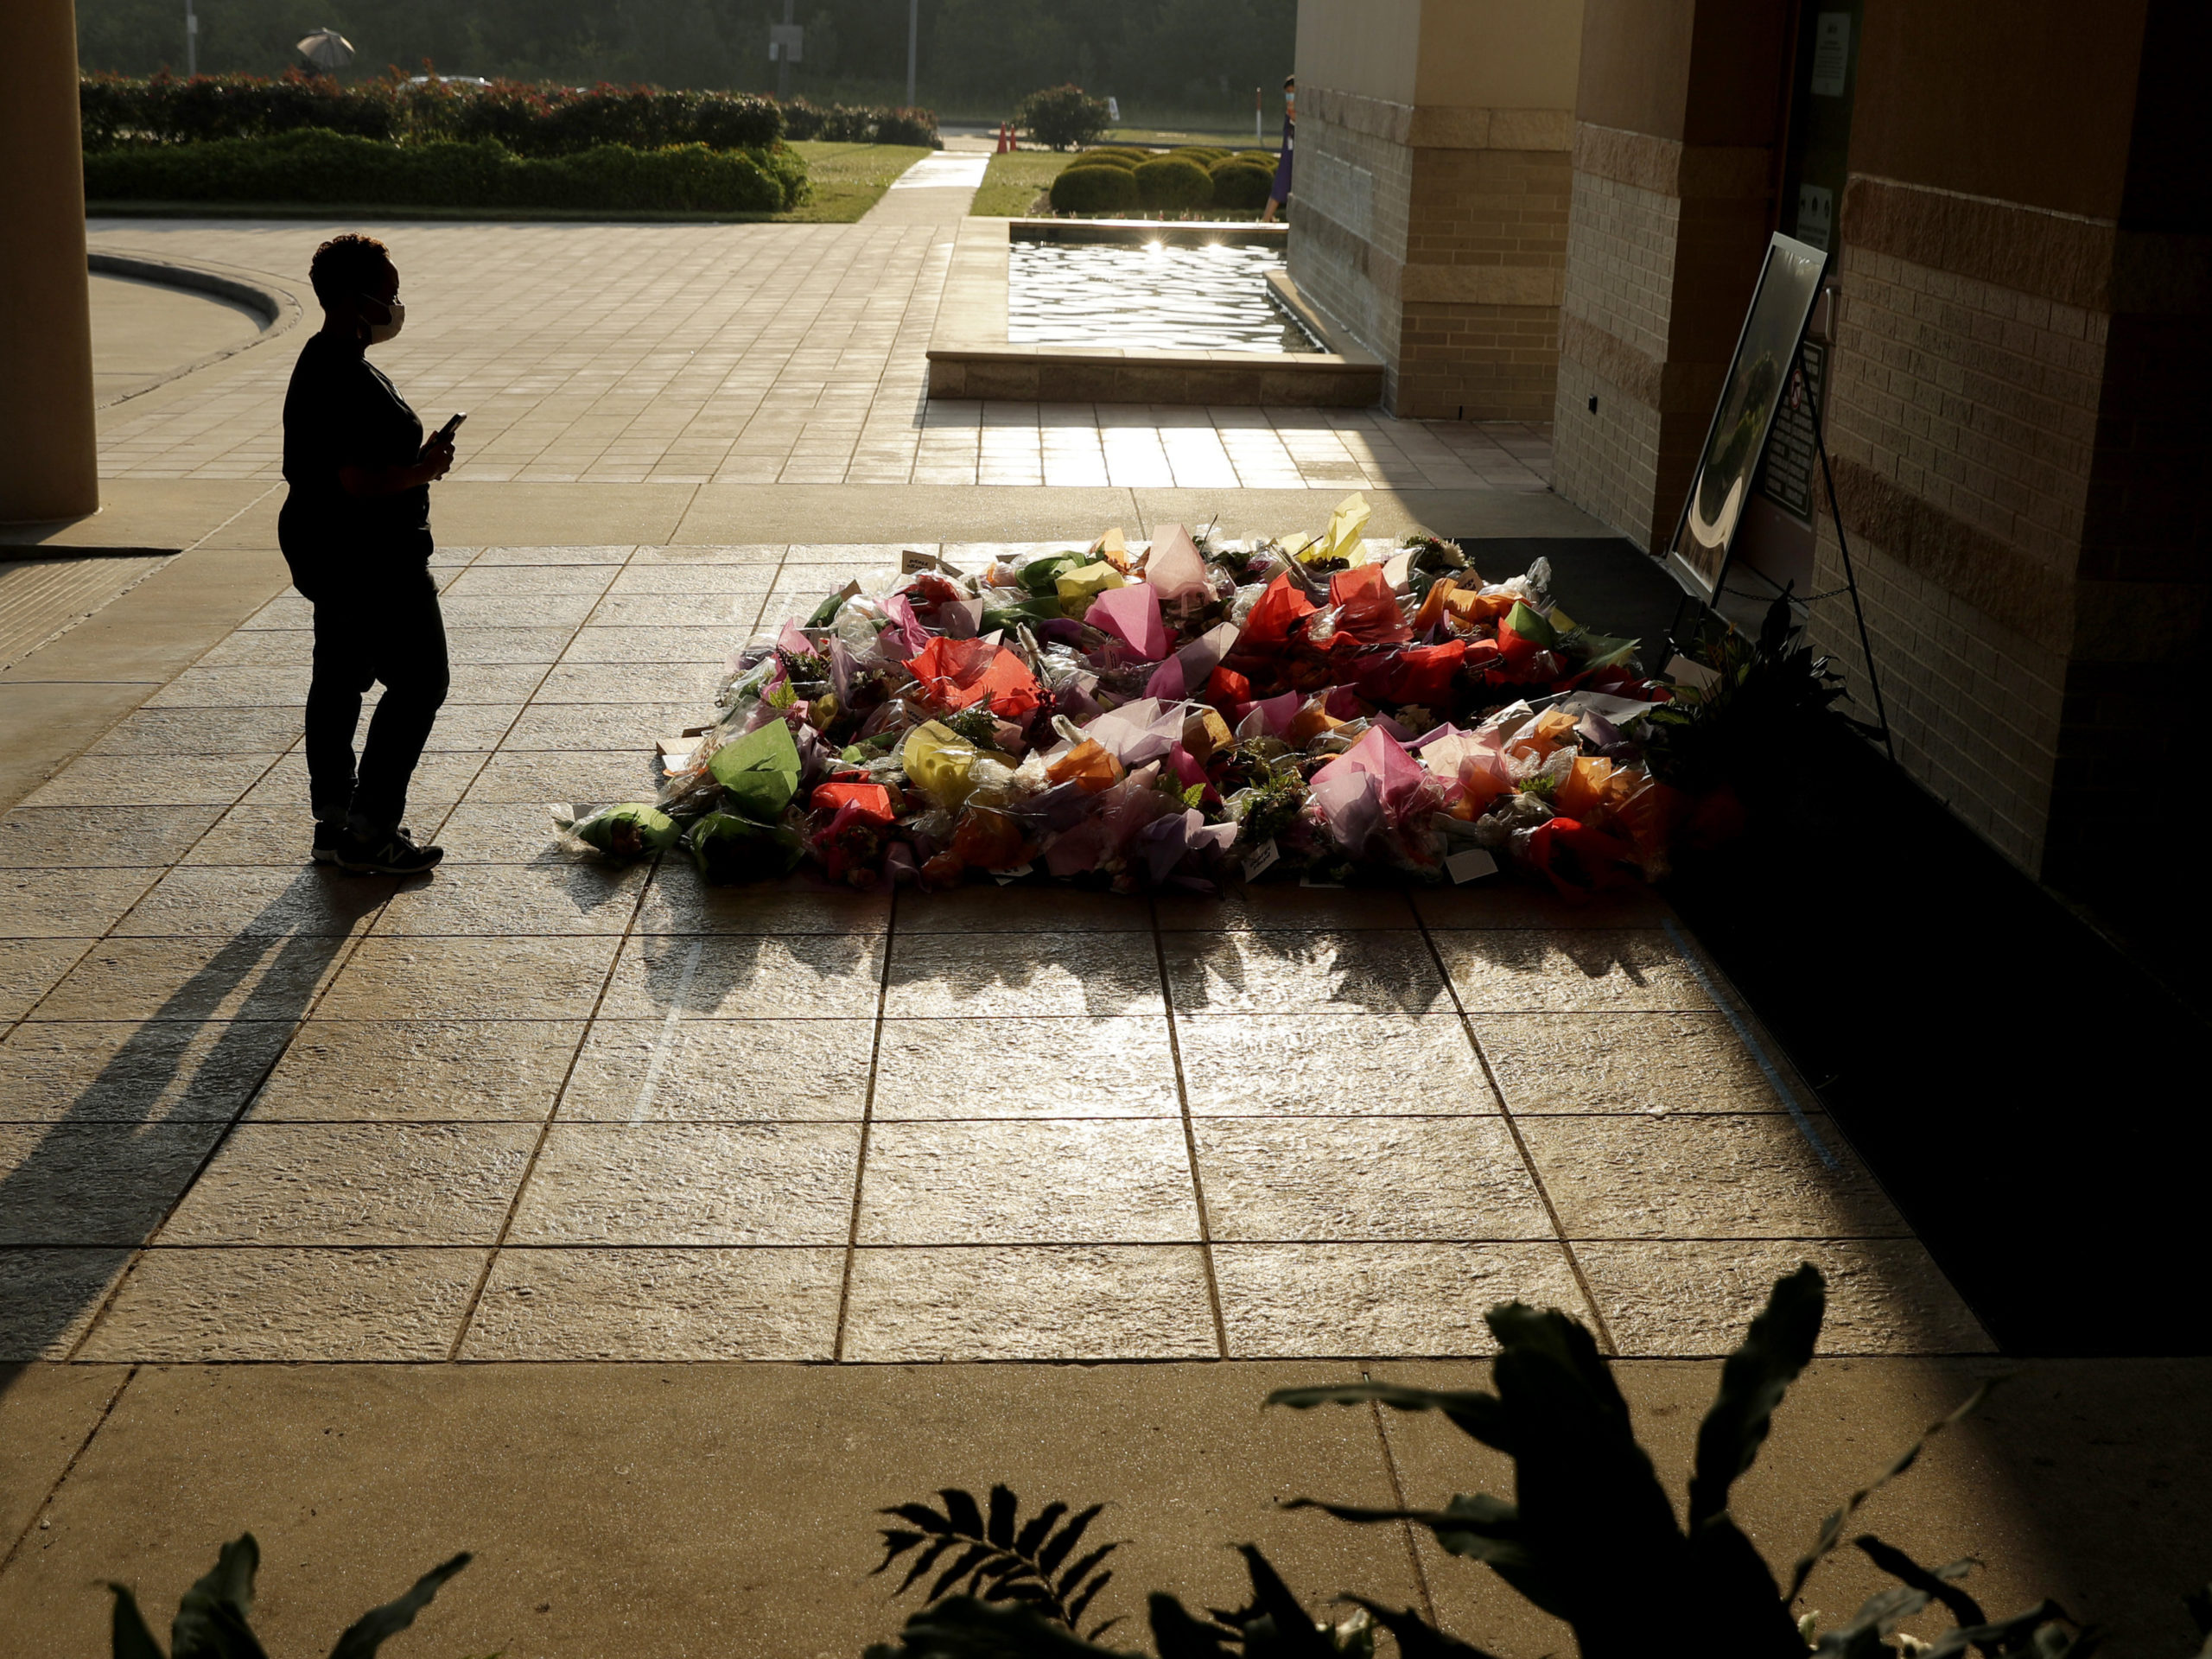 A woman stops to photograph a memorial Tuesday for Floyd at The Fountain of Praise church in Houston. CREDIT: Eric Gay/AP